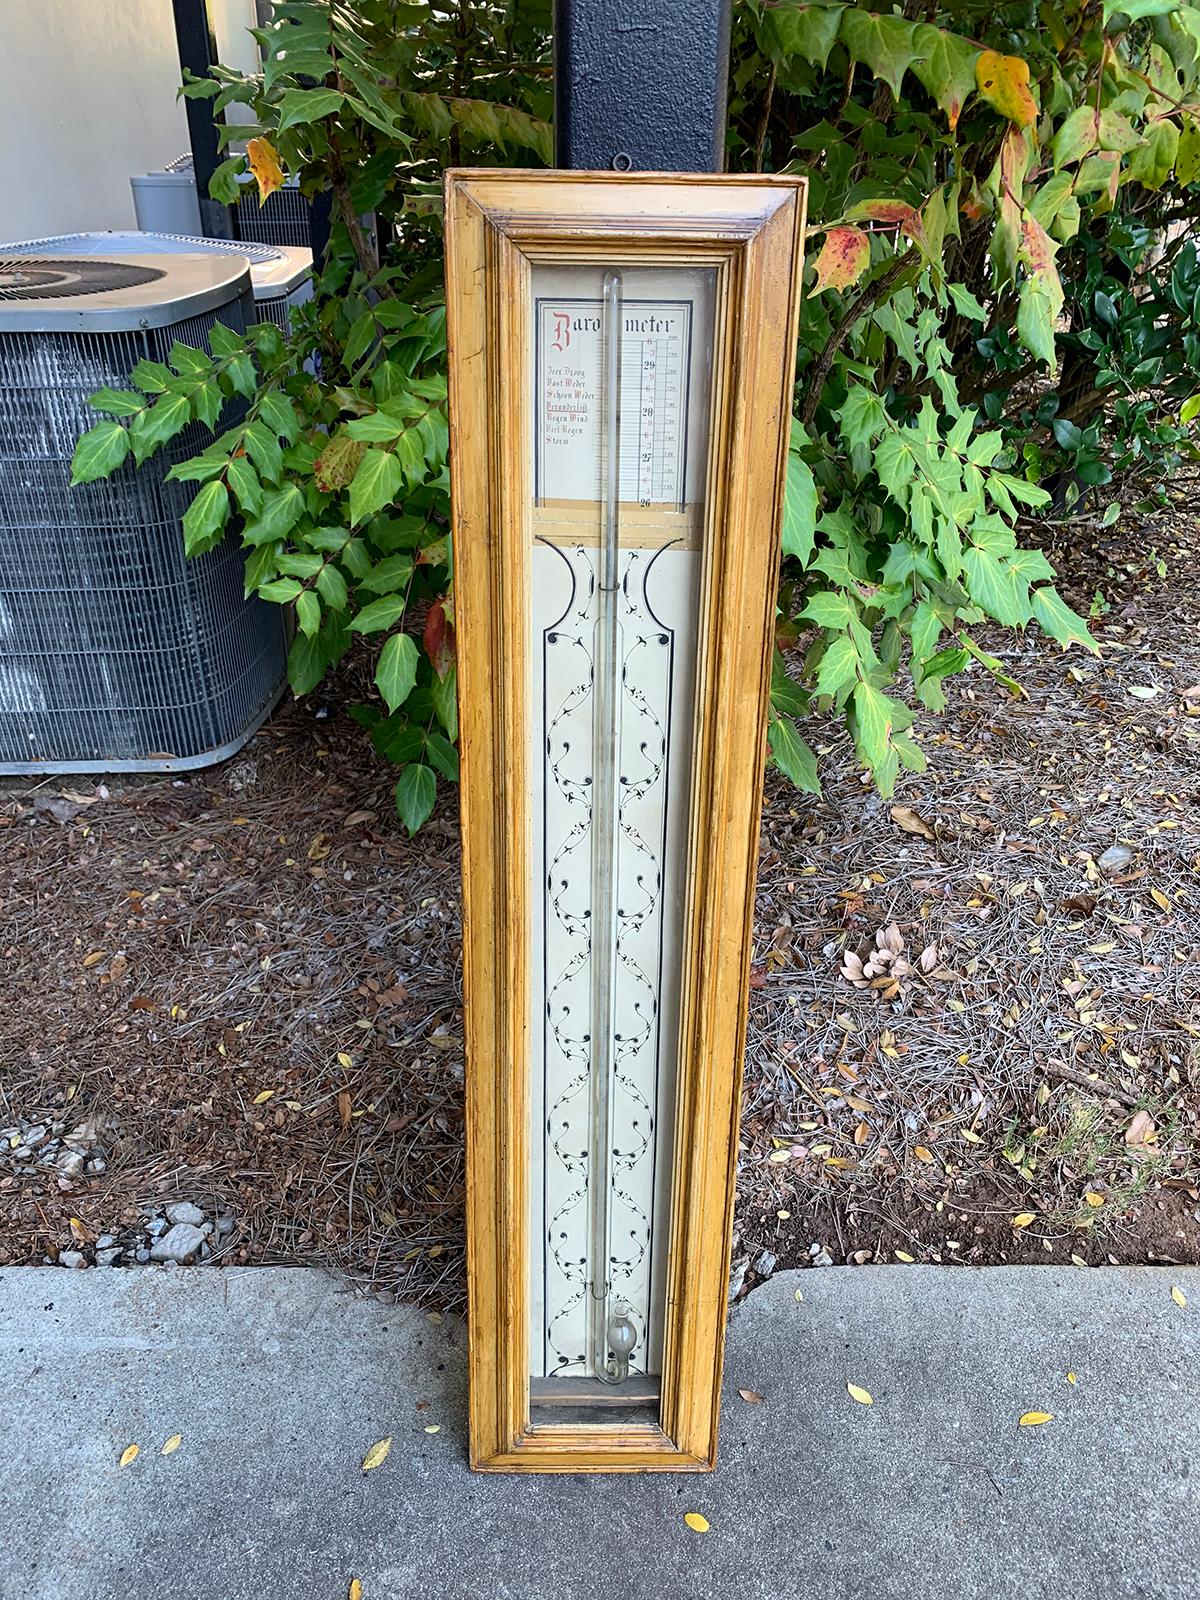 19th century continental faux bois stick barometer
Frame measures 8.25